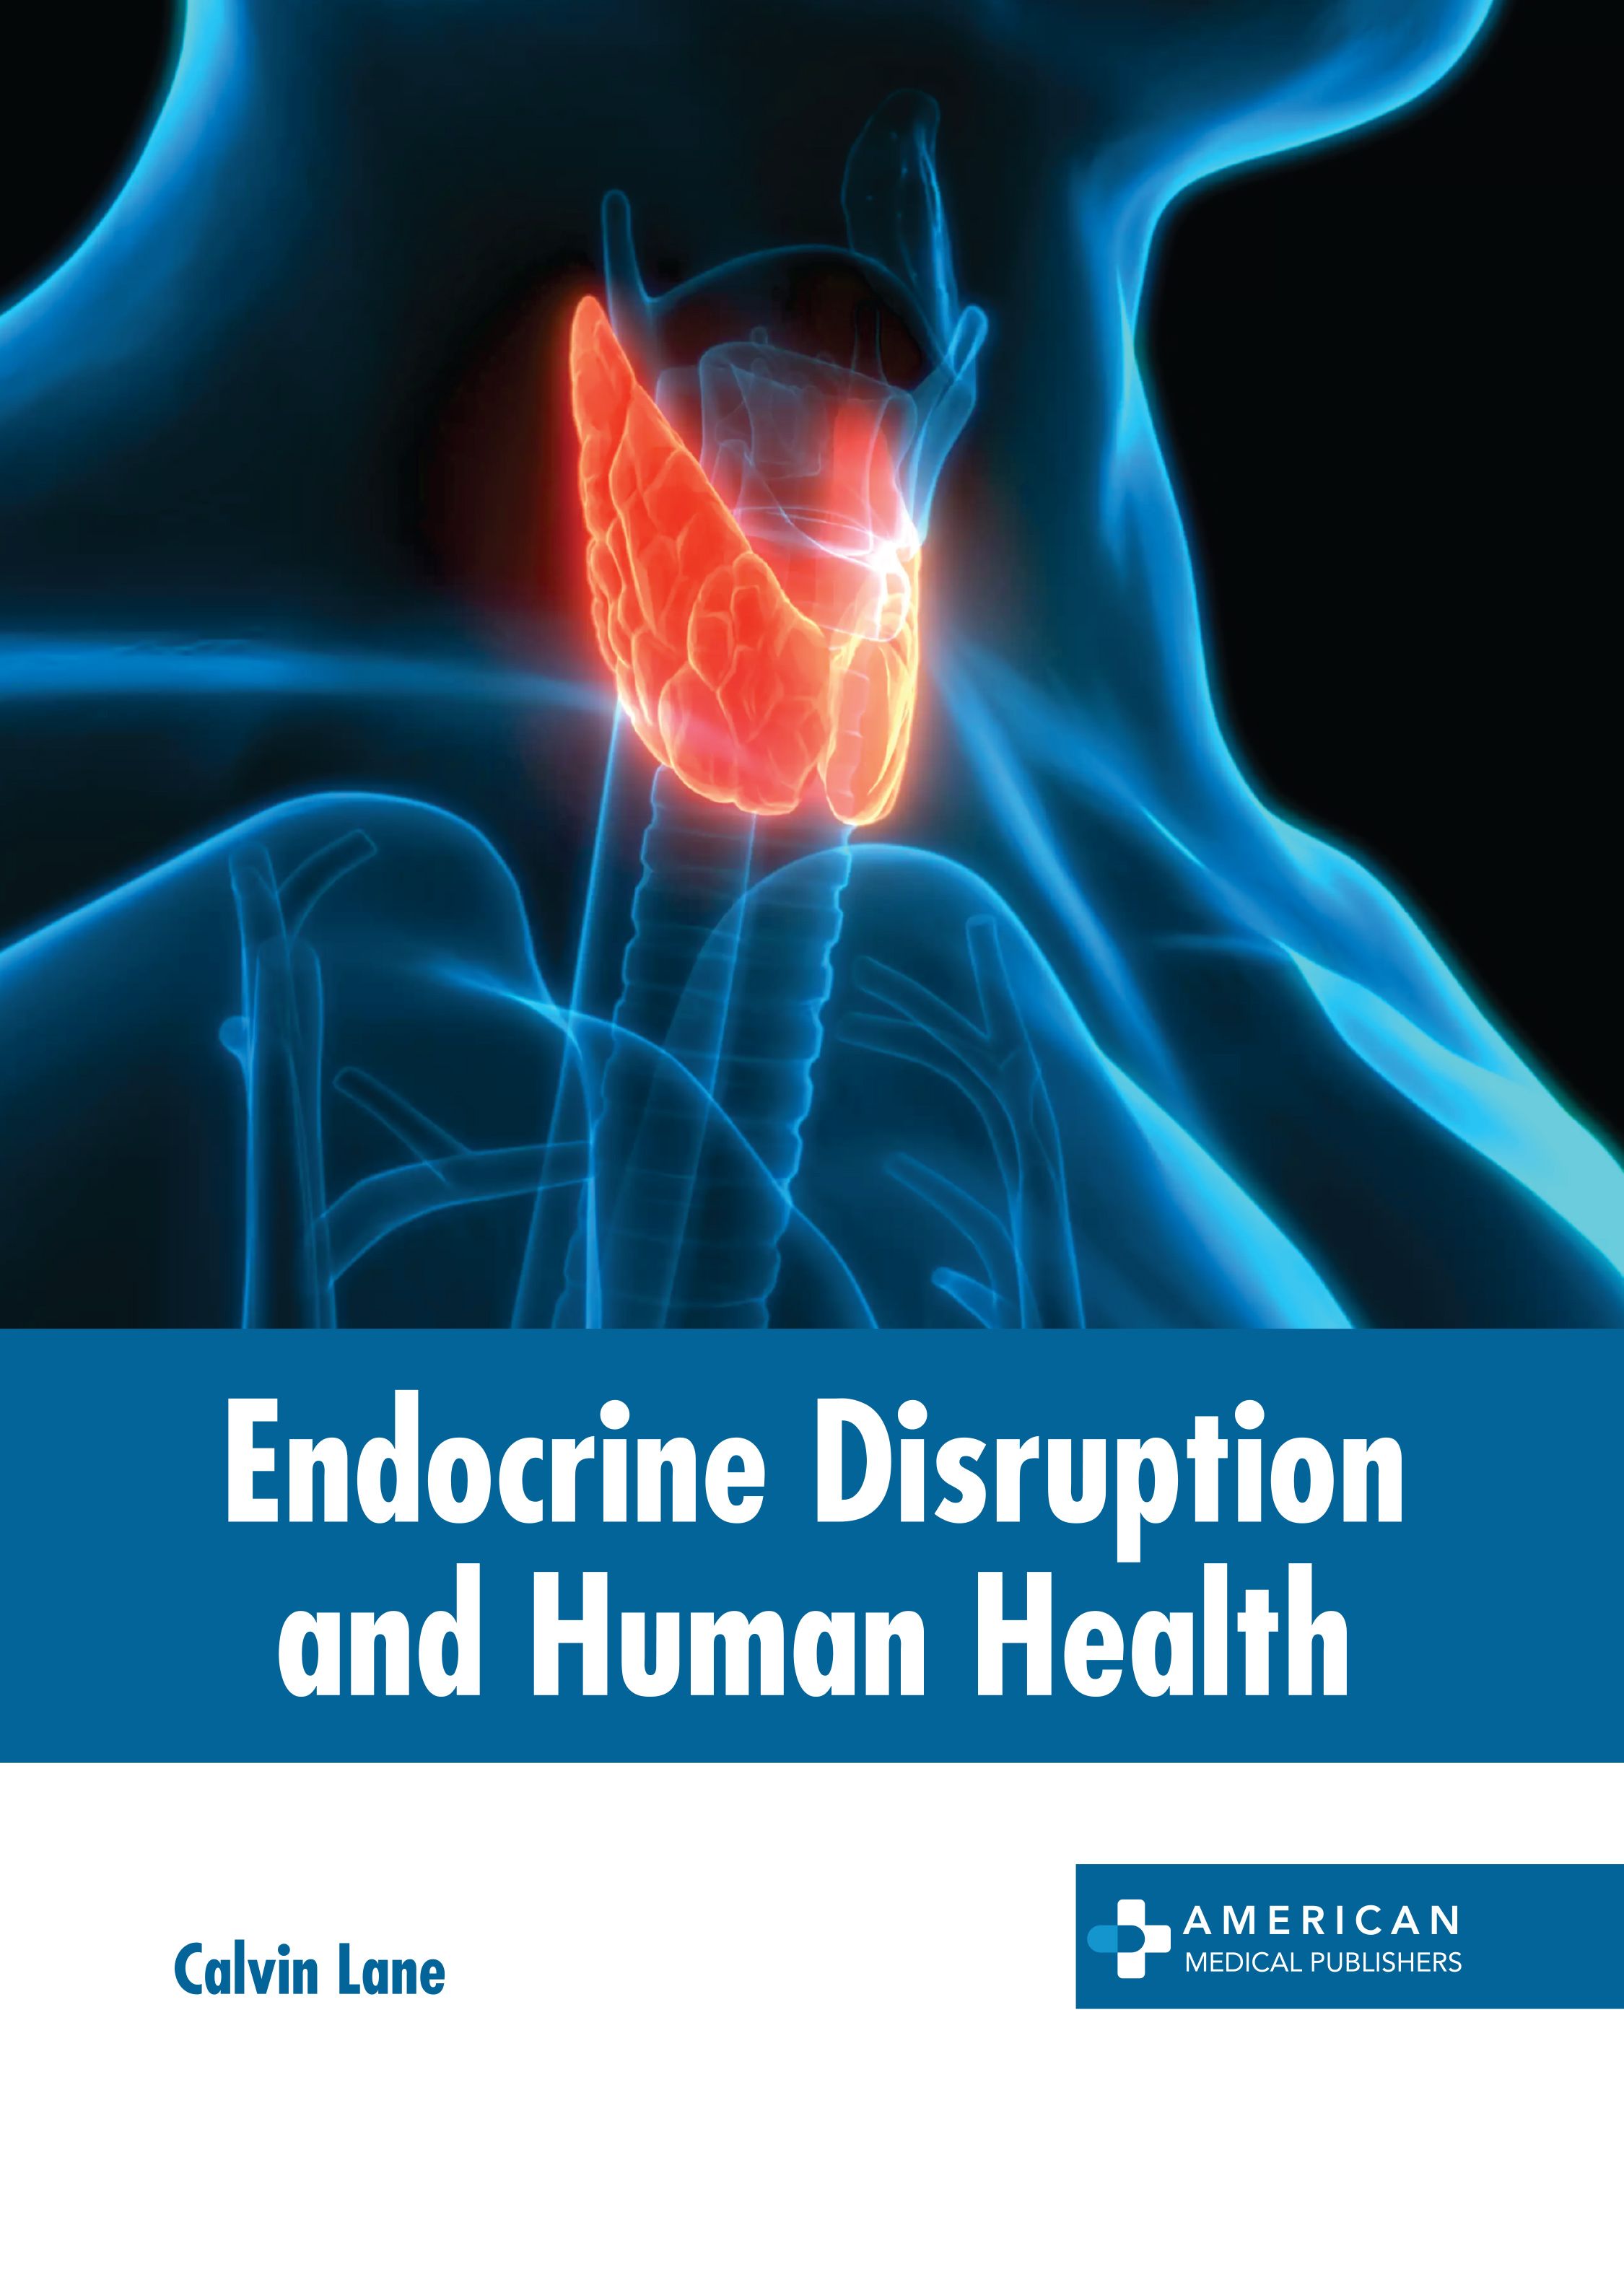 

exclusive-publishers/american-medical-publishers/endocrine-disruption-and-human-health-9798887400938